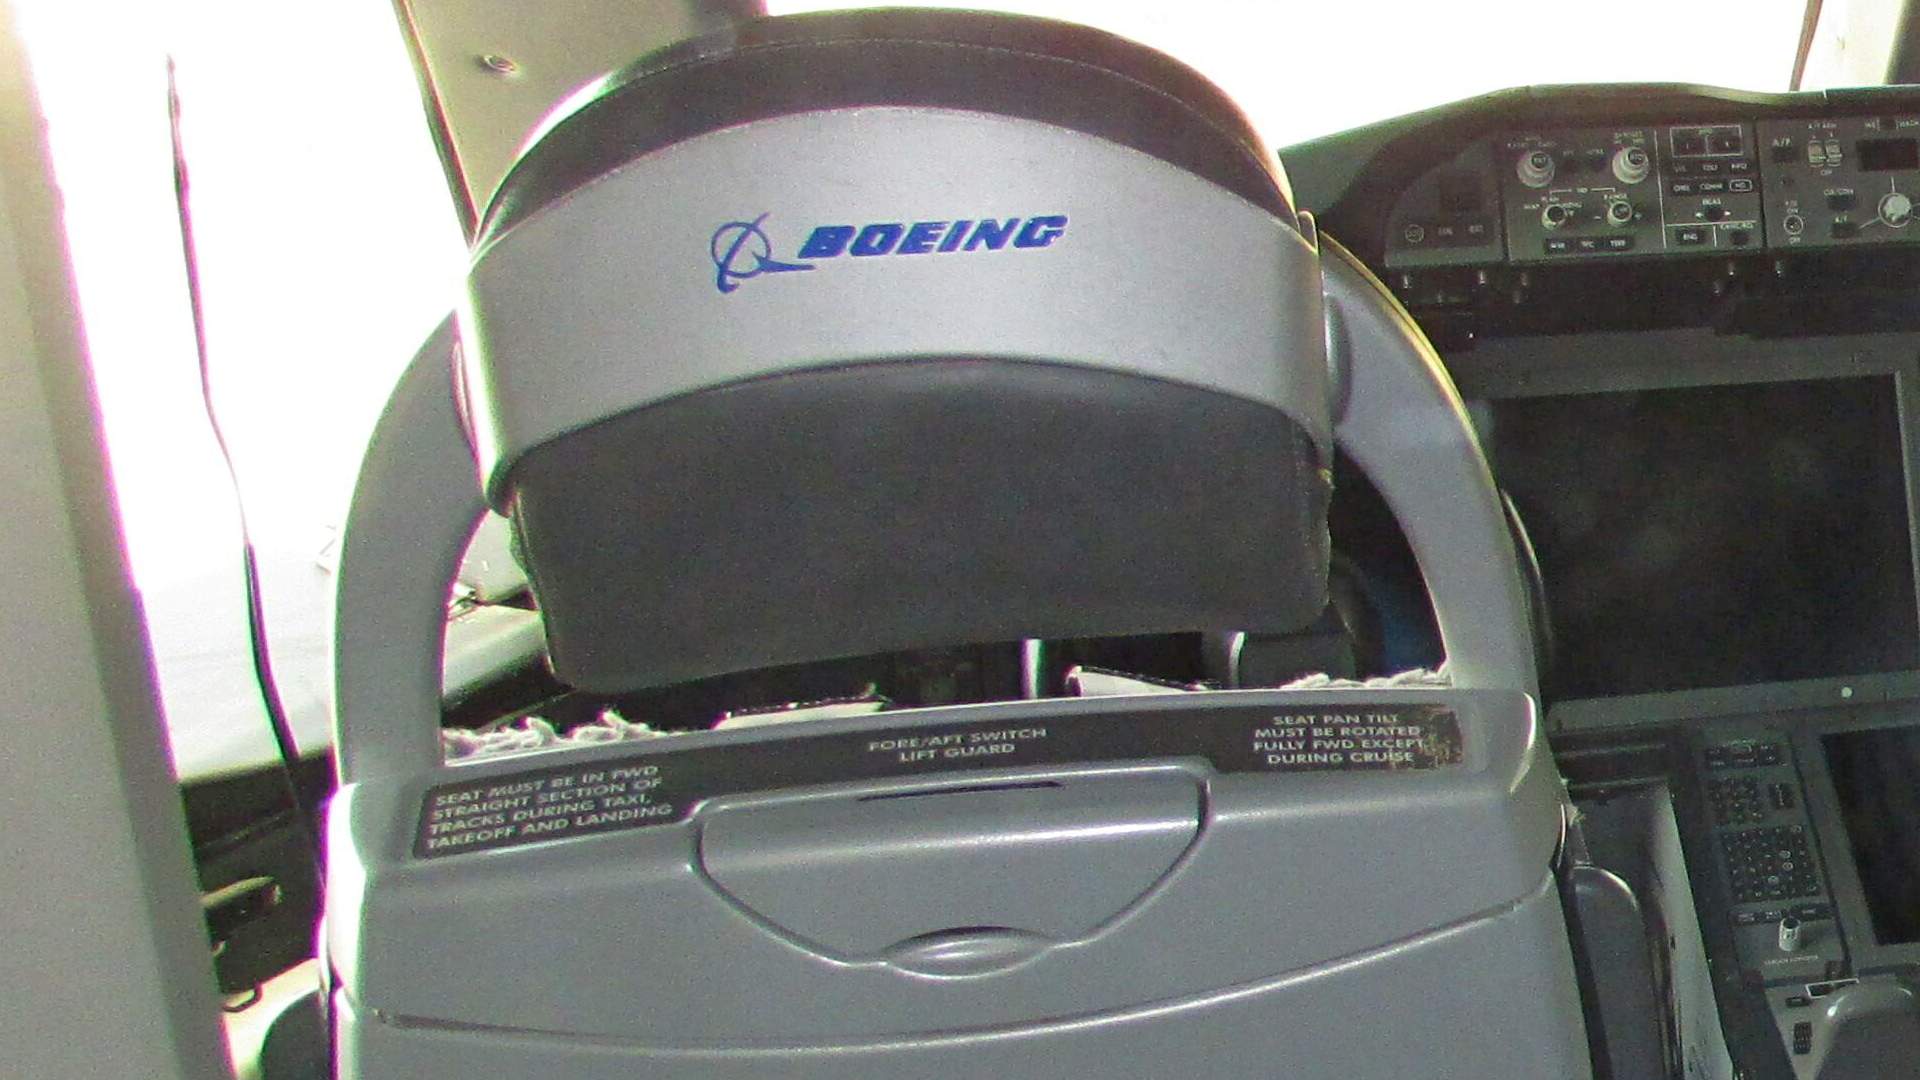 ACCIDENT: Loose 787 Seat Switch Causes 50 Passenger Injuries